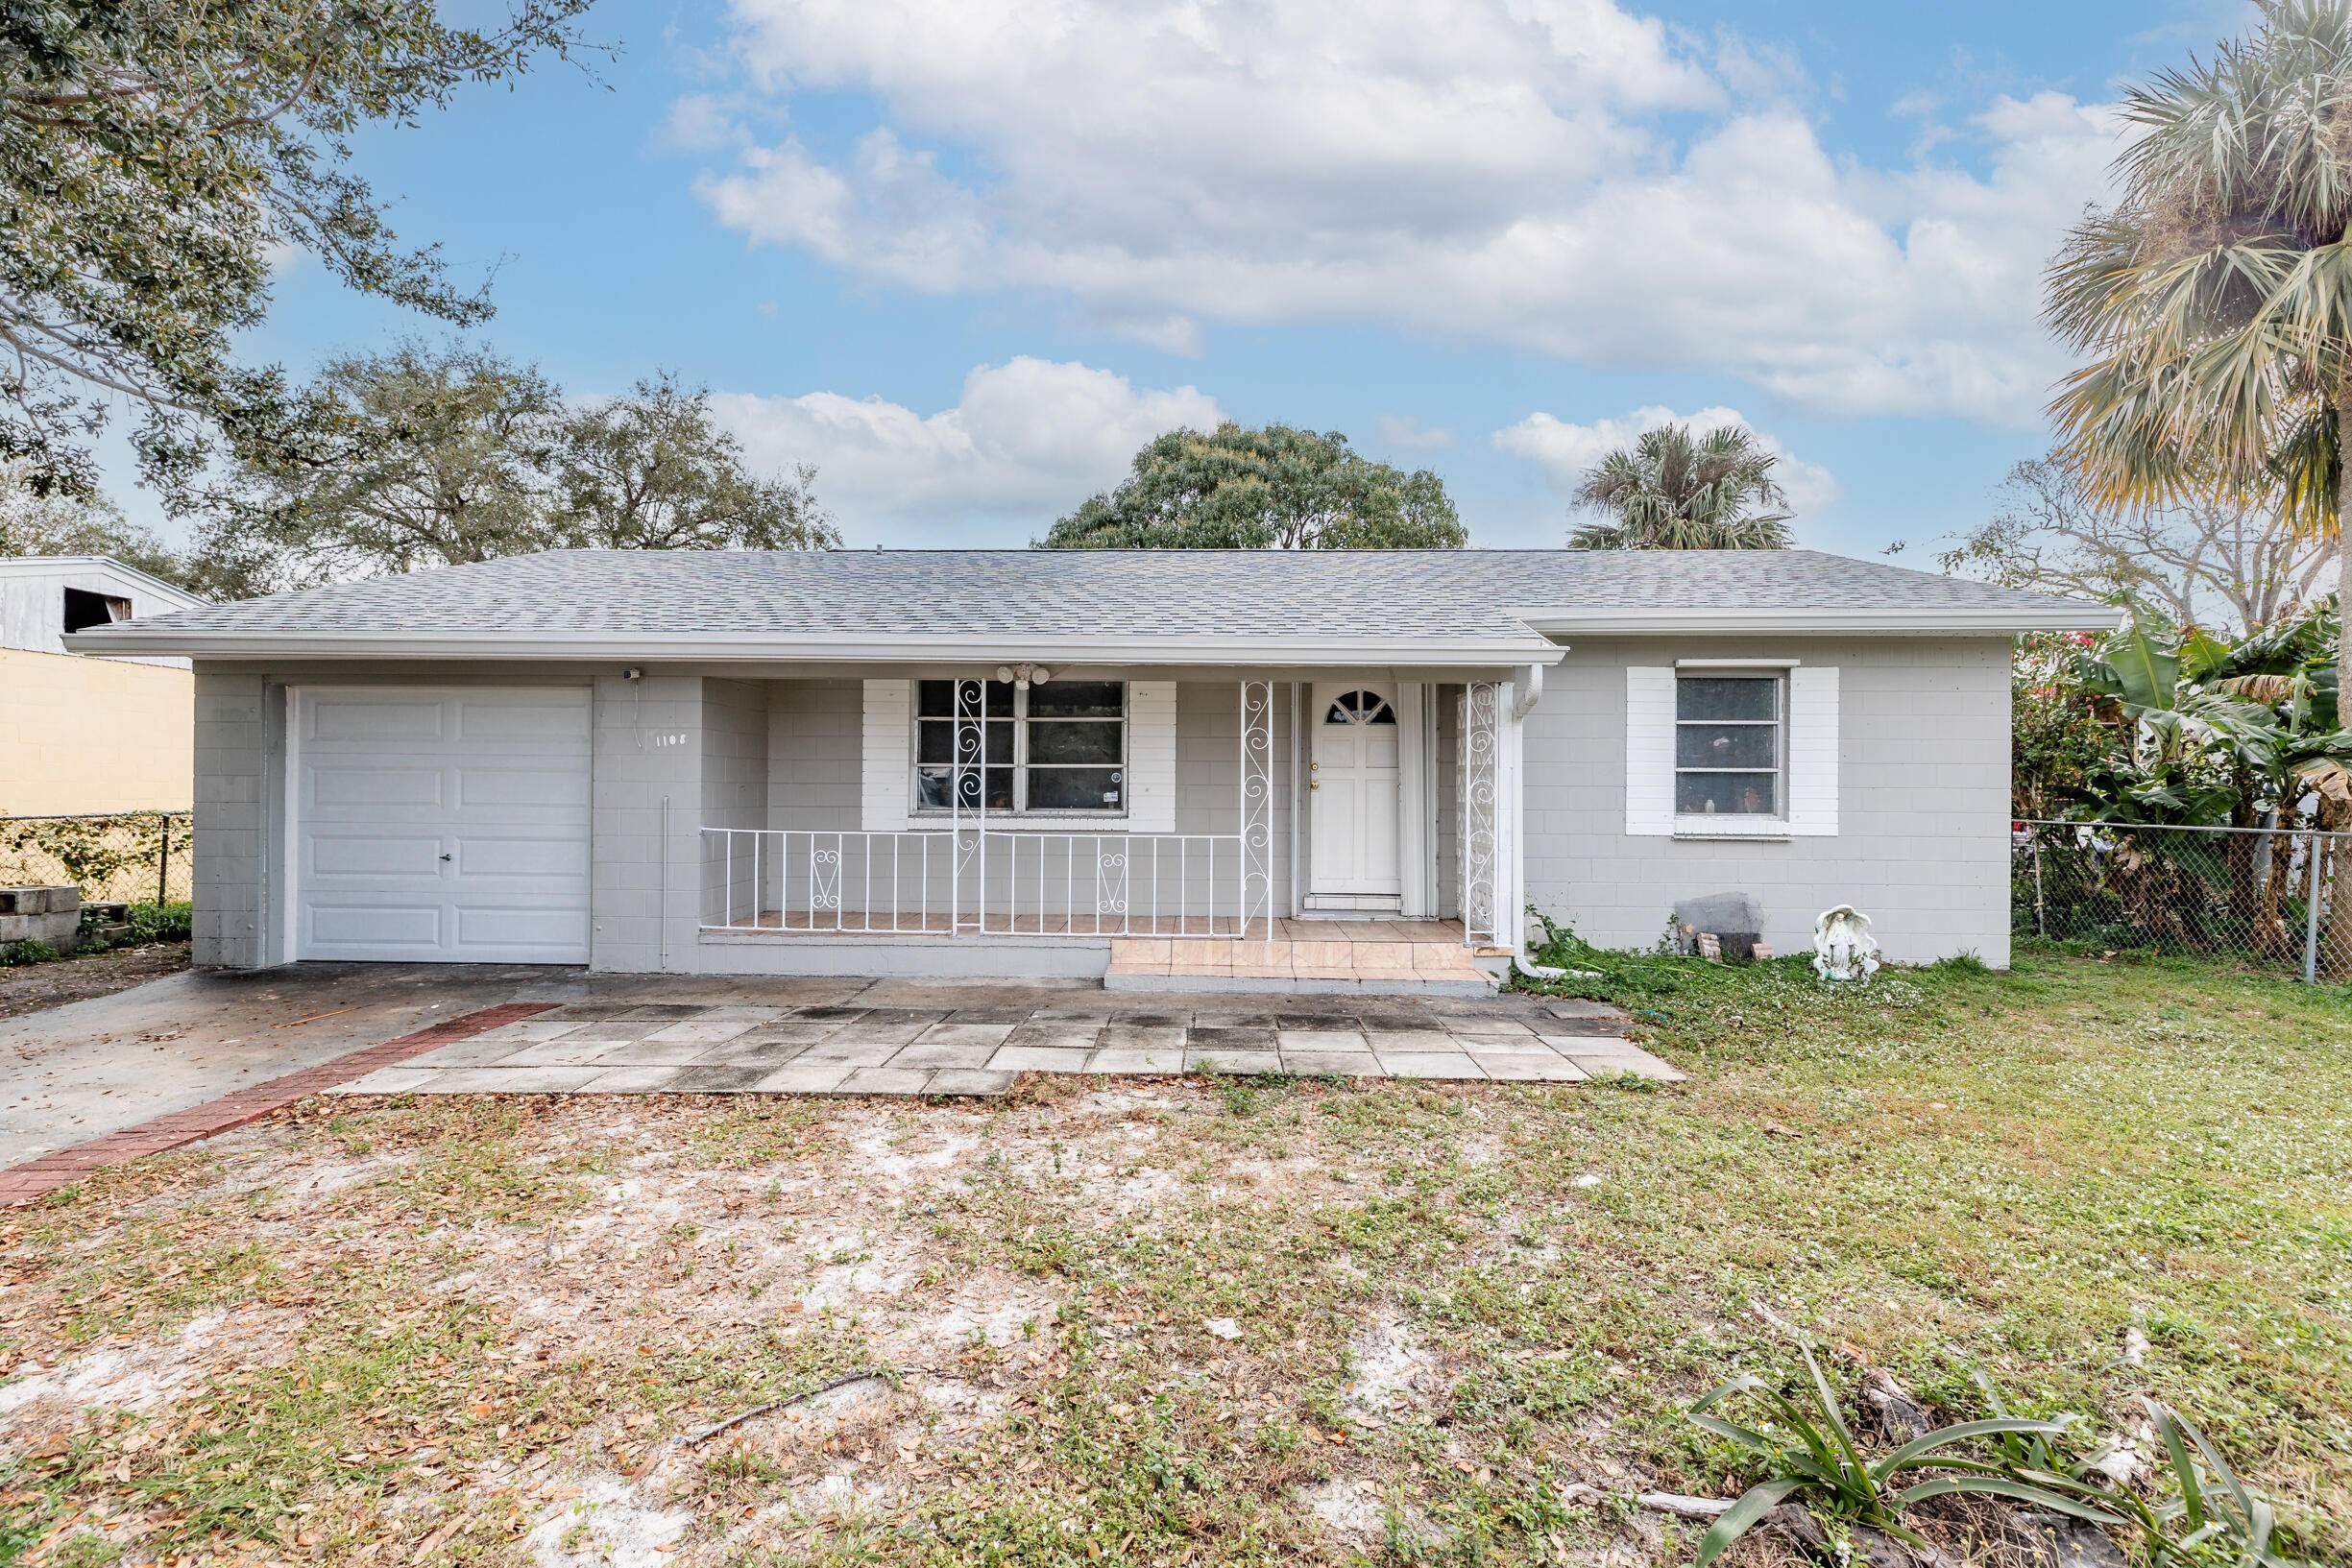 Discover the charm of this 2 bed, 1 bath home, with an added bonus a versatile den that can easily transform into a 3rd bedroom, adapting to your evolving lifestyle ...